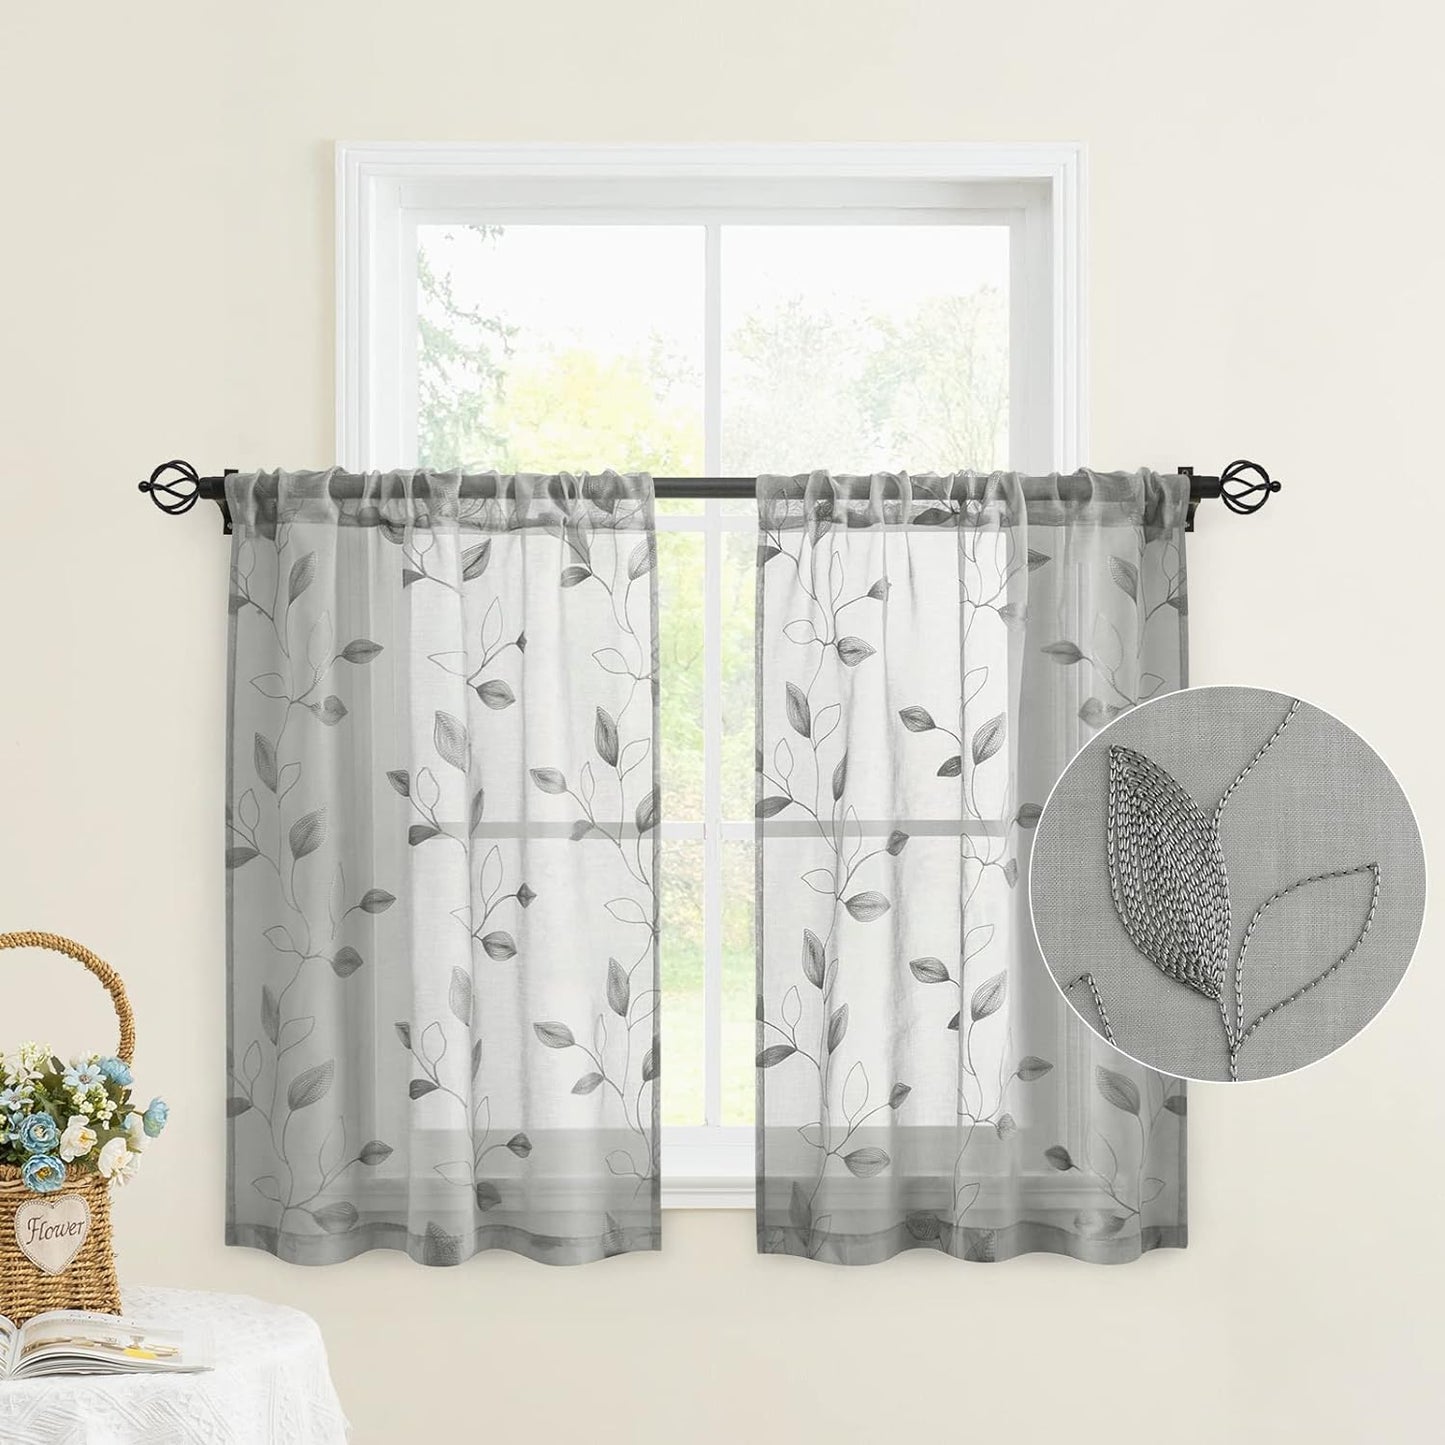 HOMEIDEAS Sage Green Sheer Curtains 52 X 63 Inches Length 2 Panels Embroidered Leaf Pattern Pocket Faux Linen Floral Semi Sheer Voile Window Curtains/Drapes for Bedroom Living Room  HOMEIDEAS 3-Grey W30" X L36" 